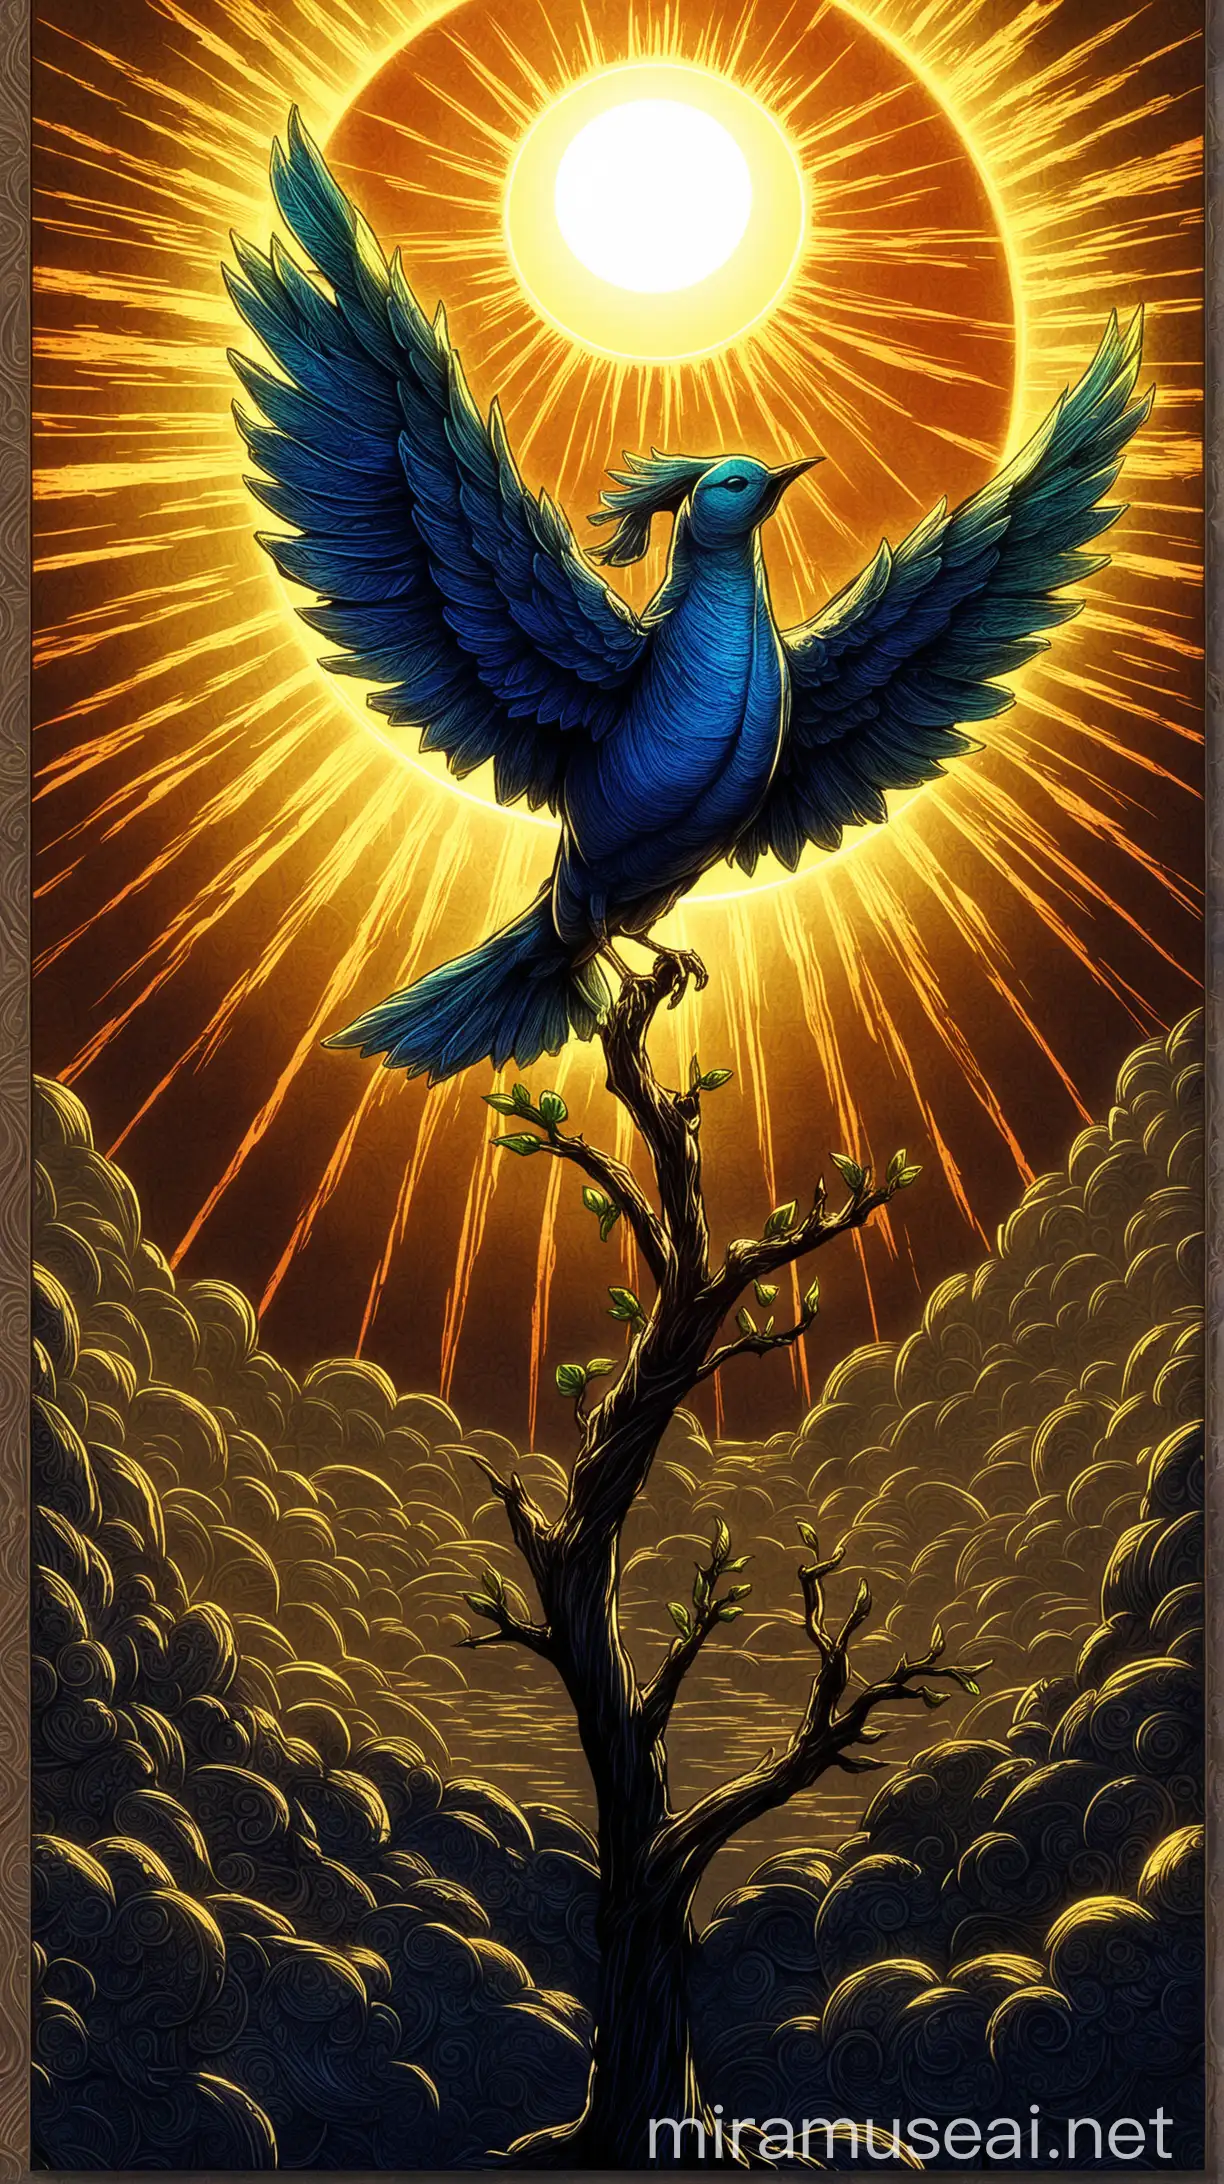 token of a beautiful mystical bird on a  background of the sun. Colors adds depth and richness to the scene. Textures and shadows make the picture more detailed. JoJo reference.